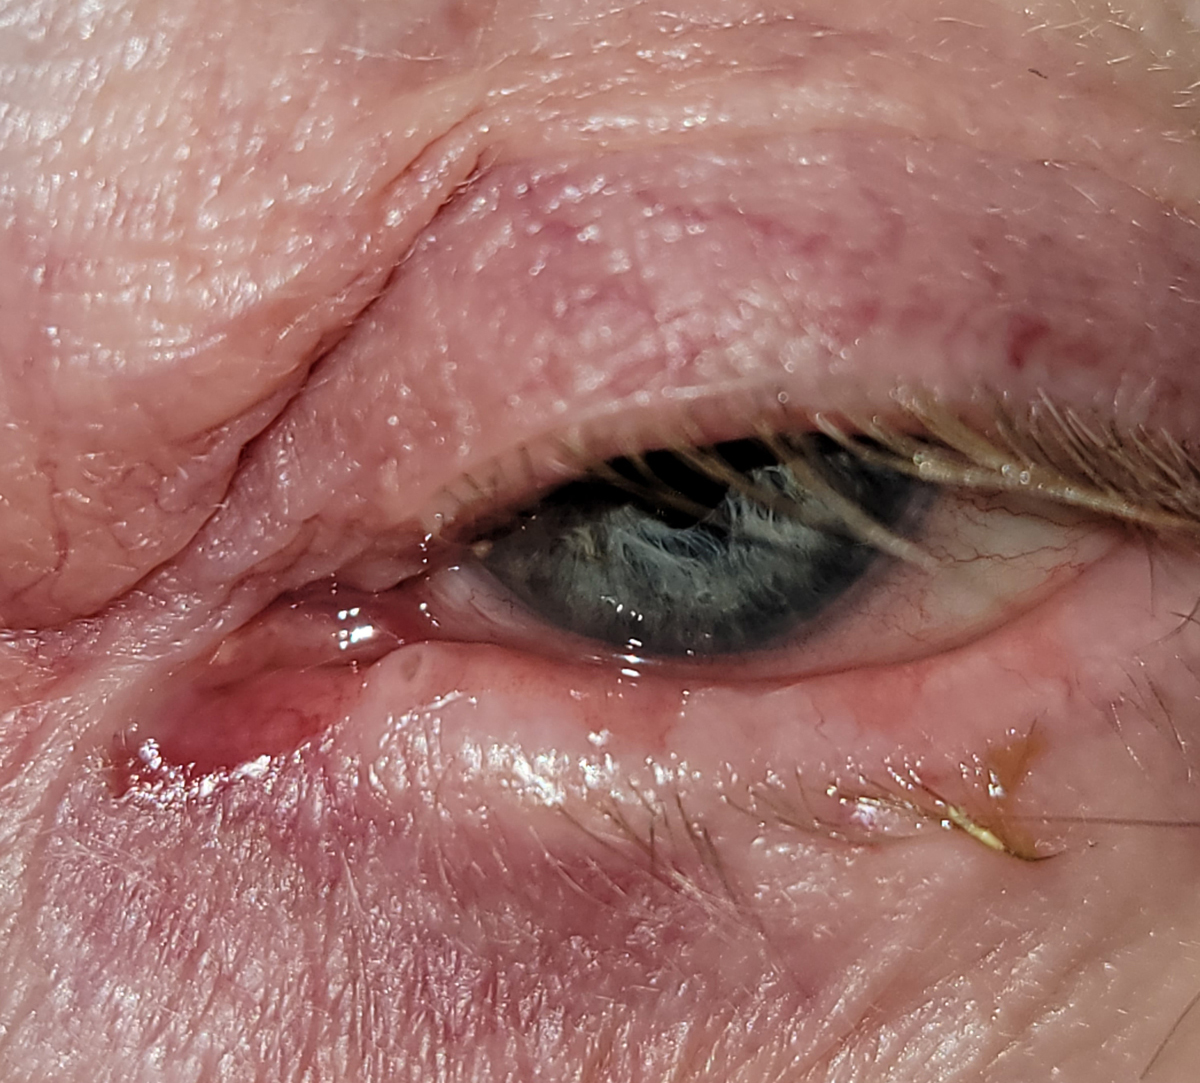 Lacrimal duct obstruction in glaucoma patients may result from chronic exposure to preservatives in topical medications.